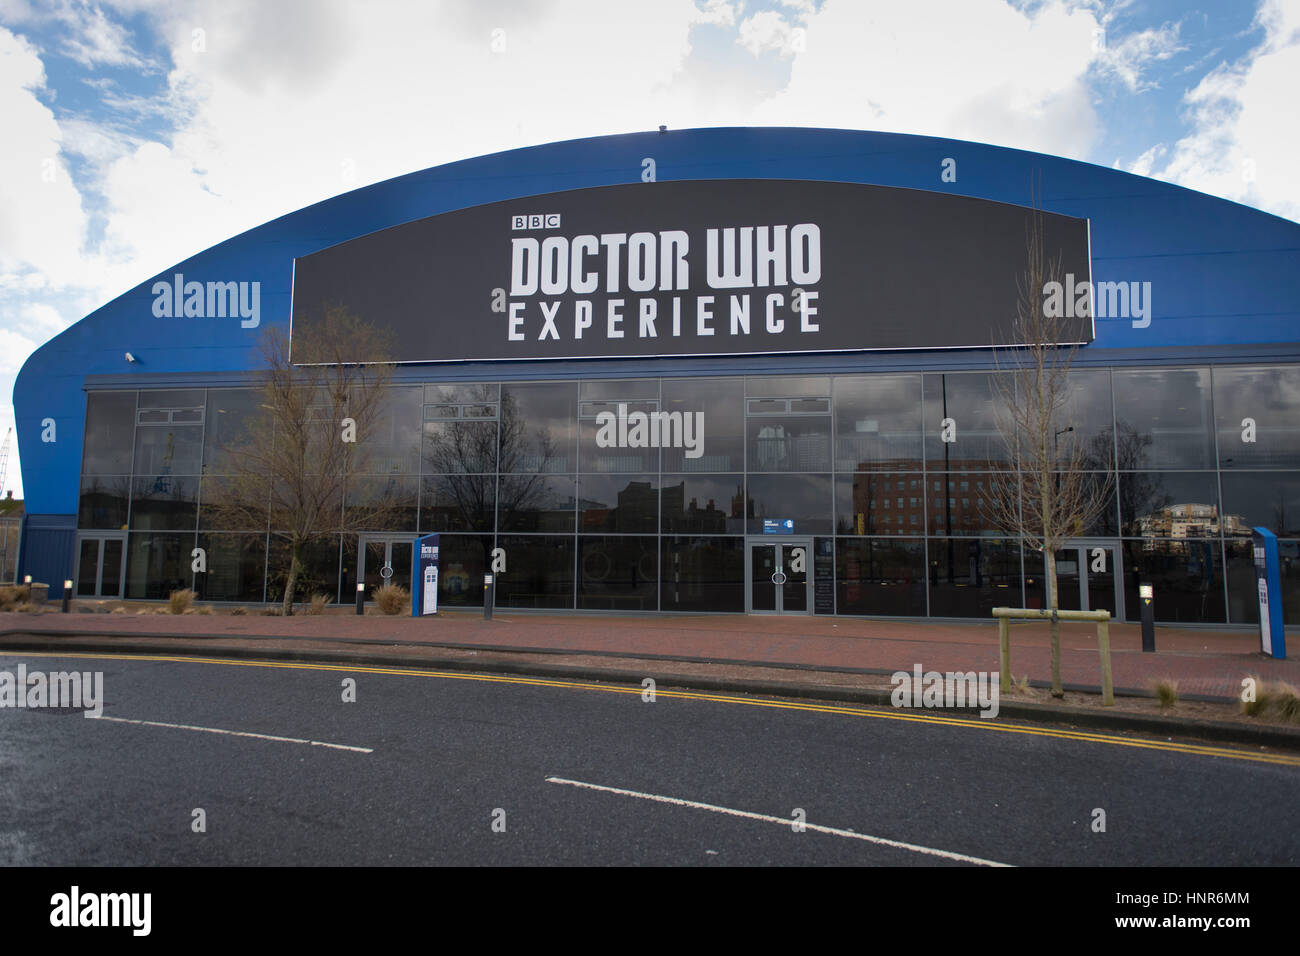 A general view of the BBC Doctor Who Experience building at Cardiff Bay, South Wales, UK. Stock Photo